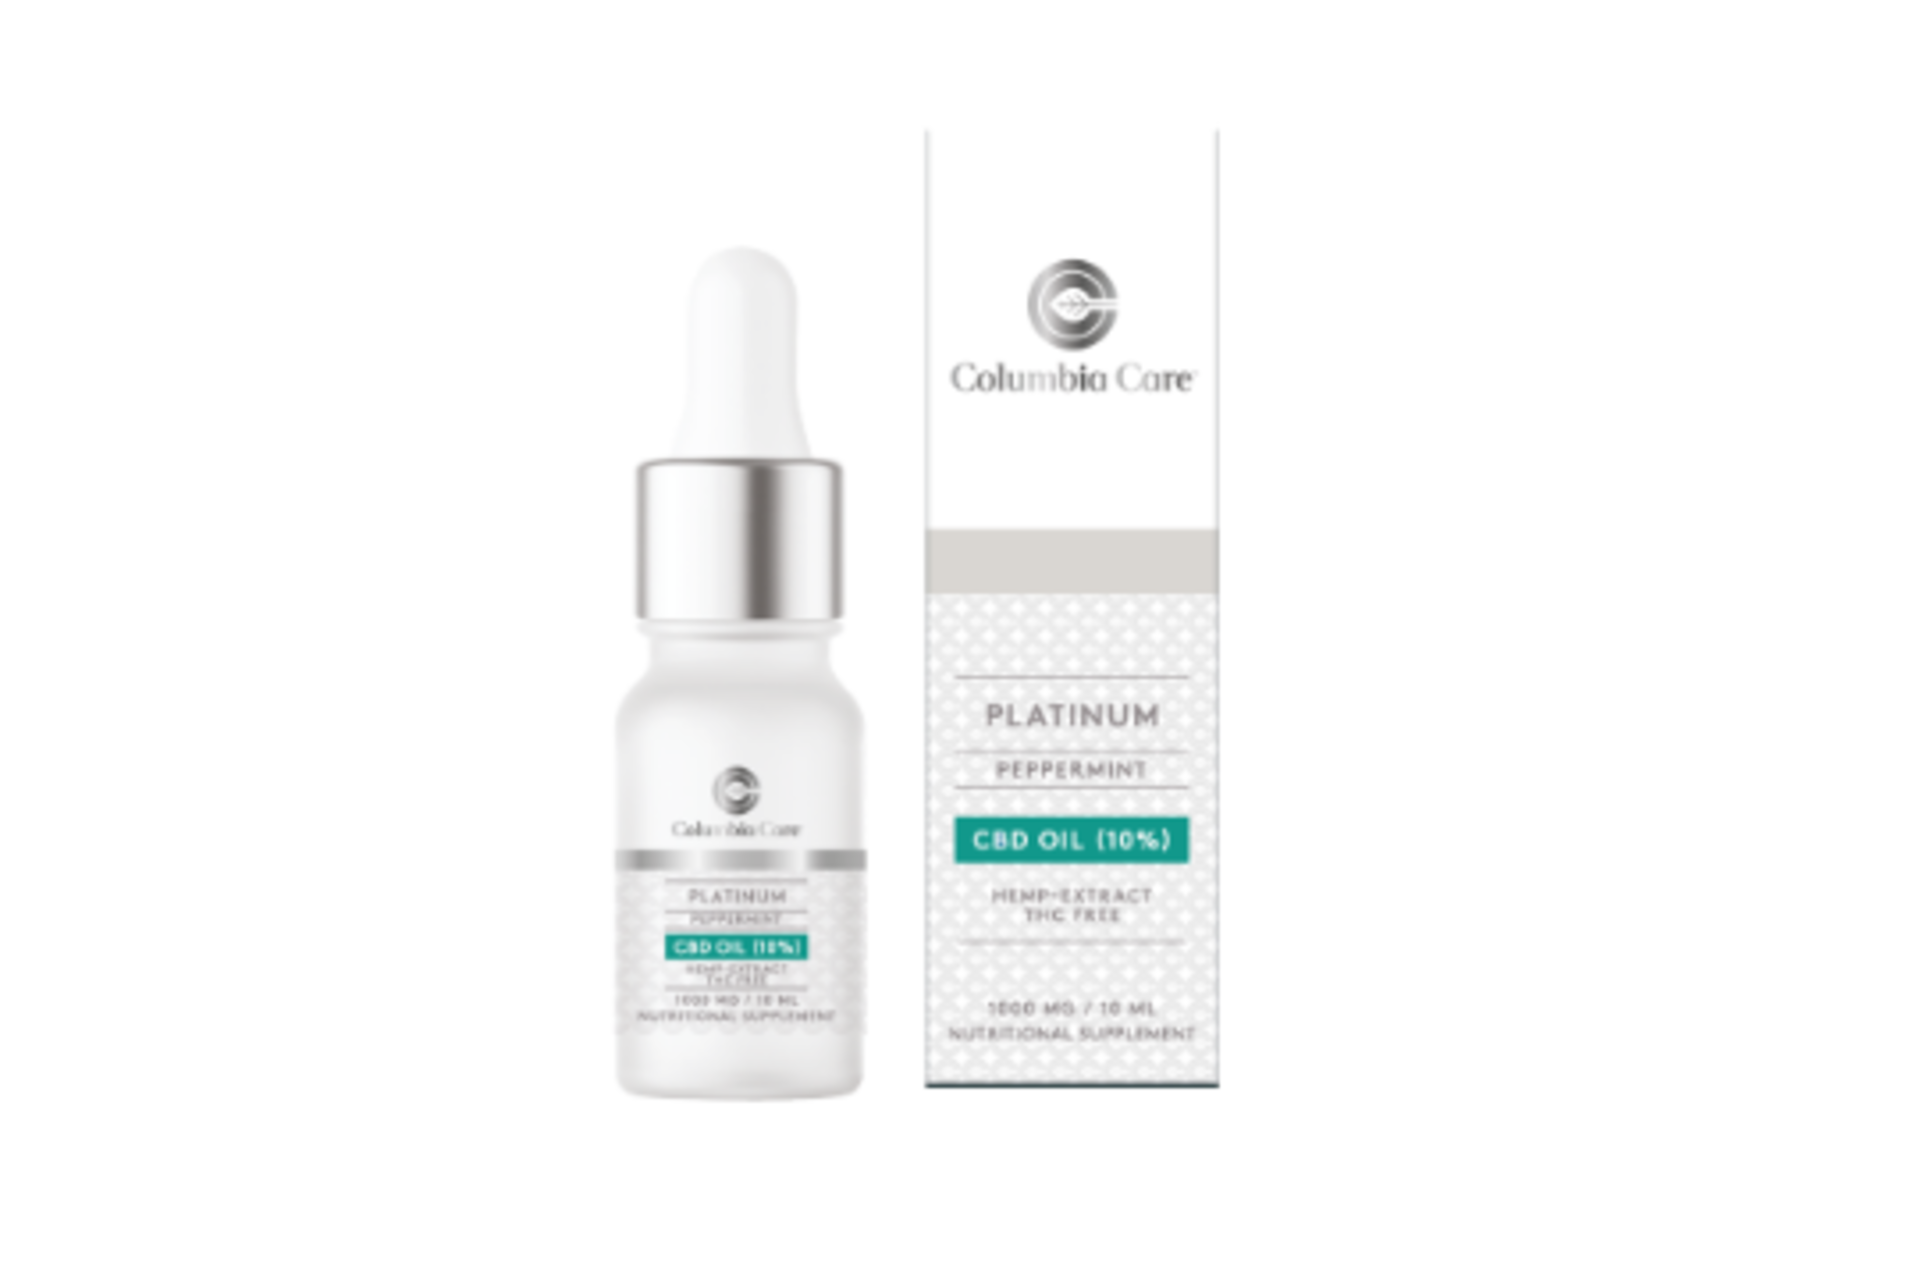 Trade Lot 50 x Brand New Columbia Care Platinum Peppermint Flavored Tincture 10ml 1000mg. Columbia